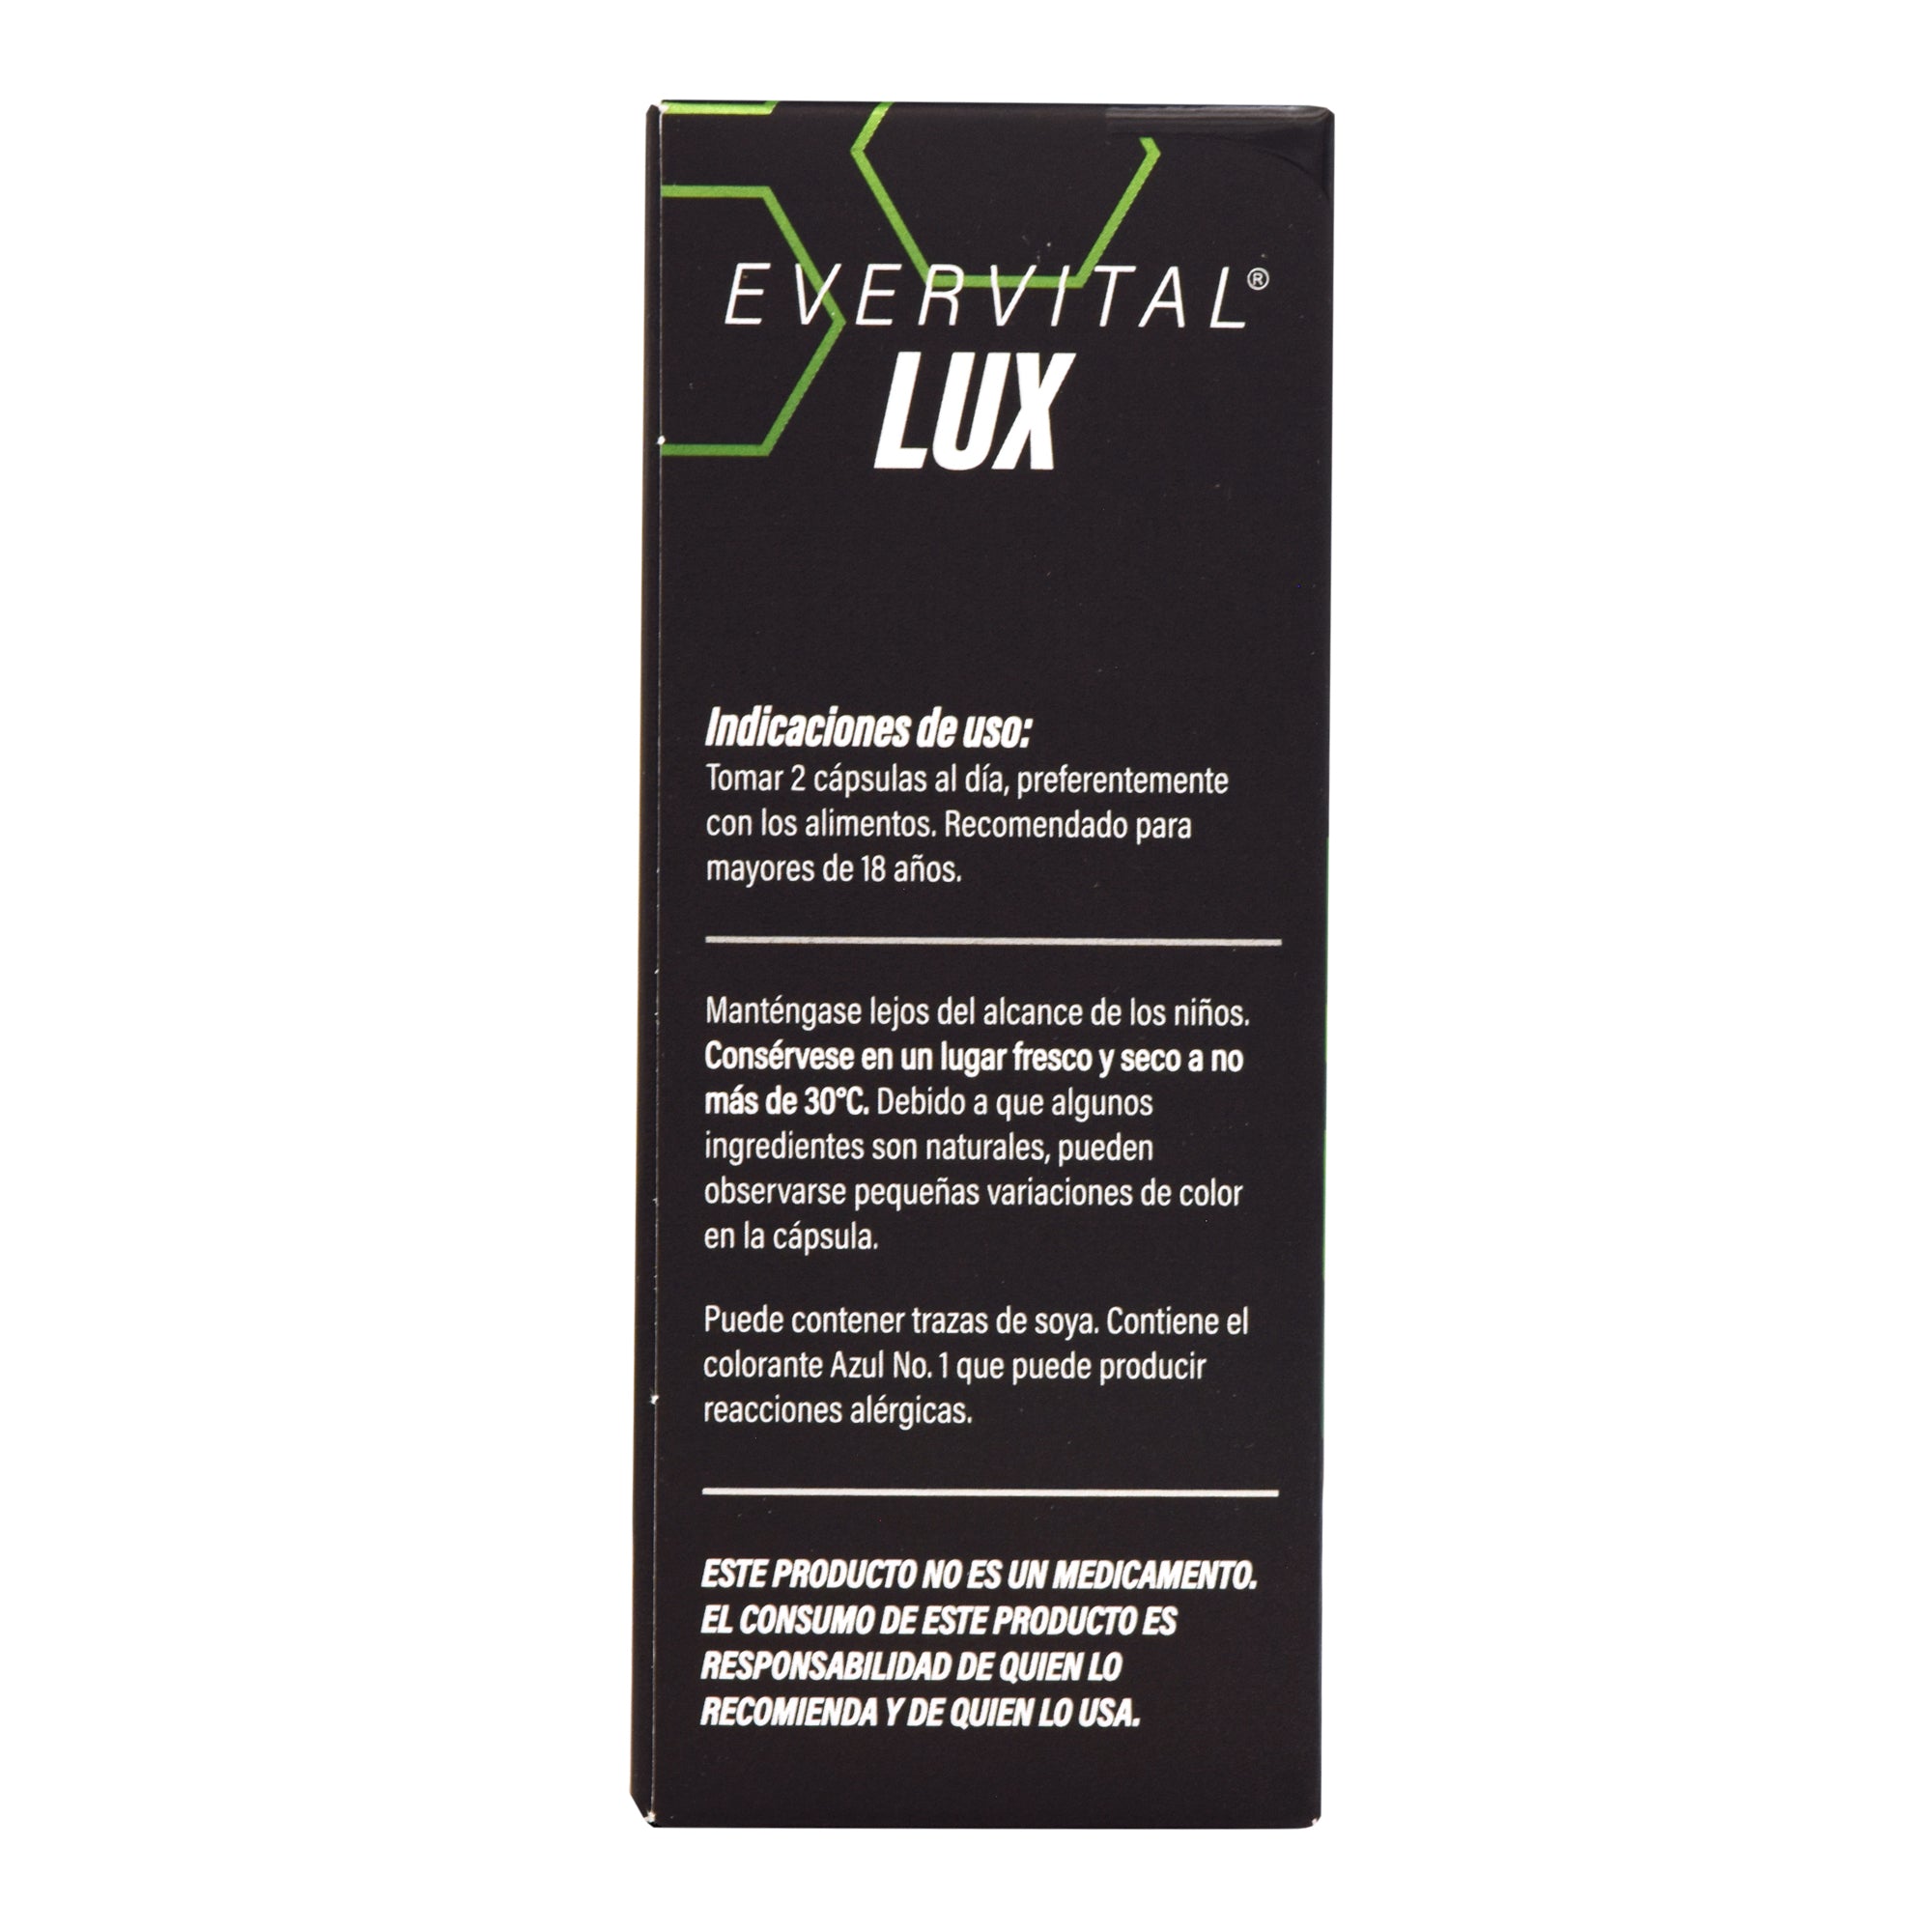 Evervital lux 60 cap